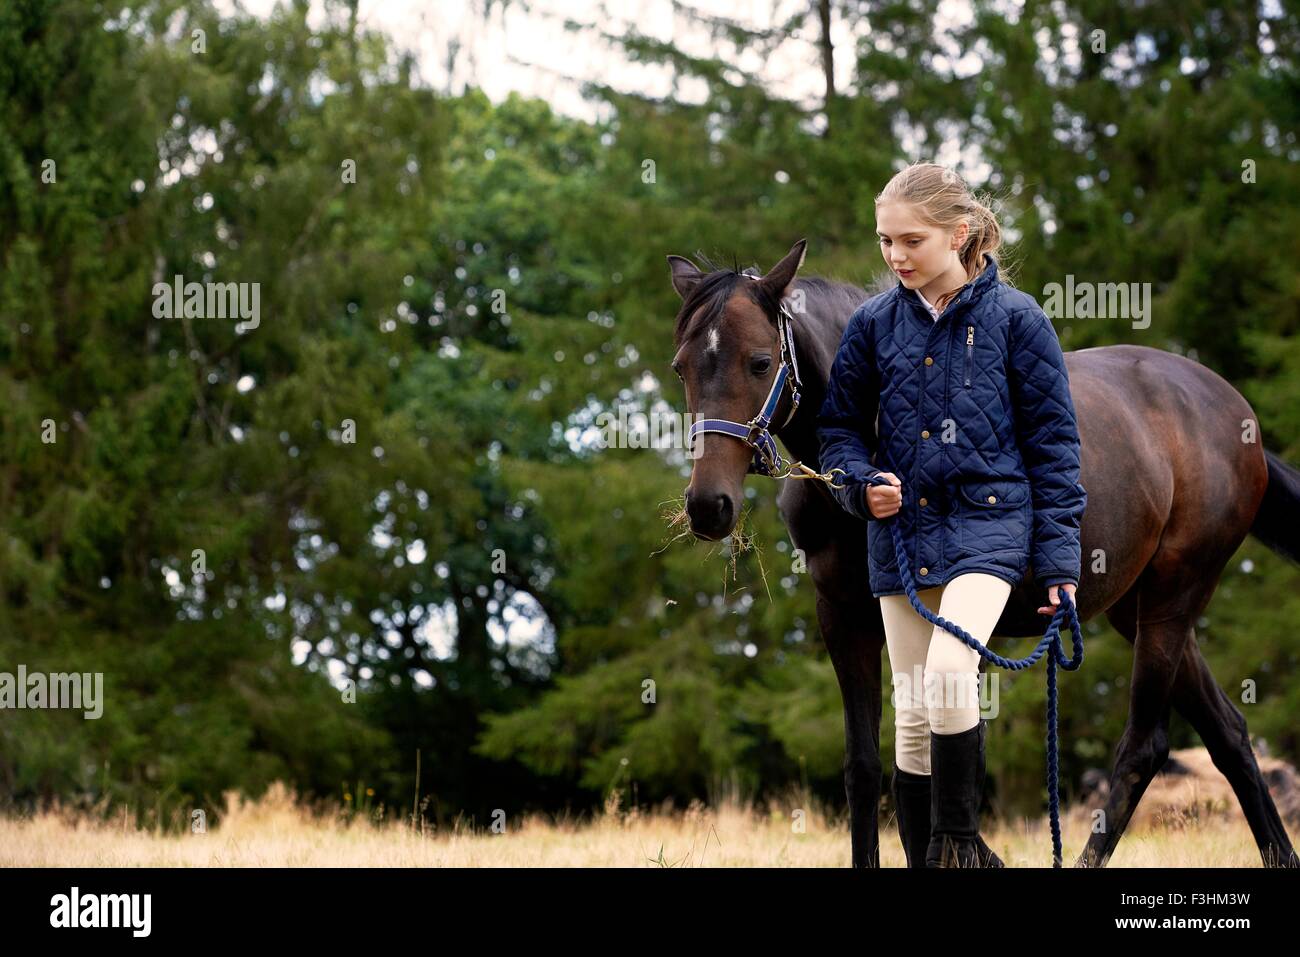 Girl leading horse in field Stock Photo